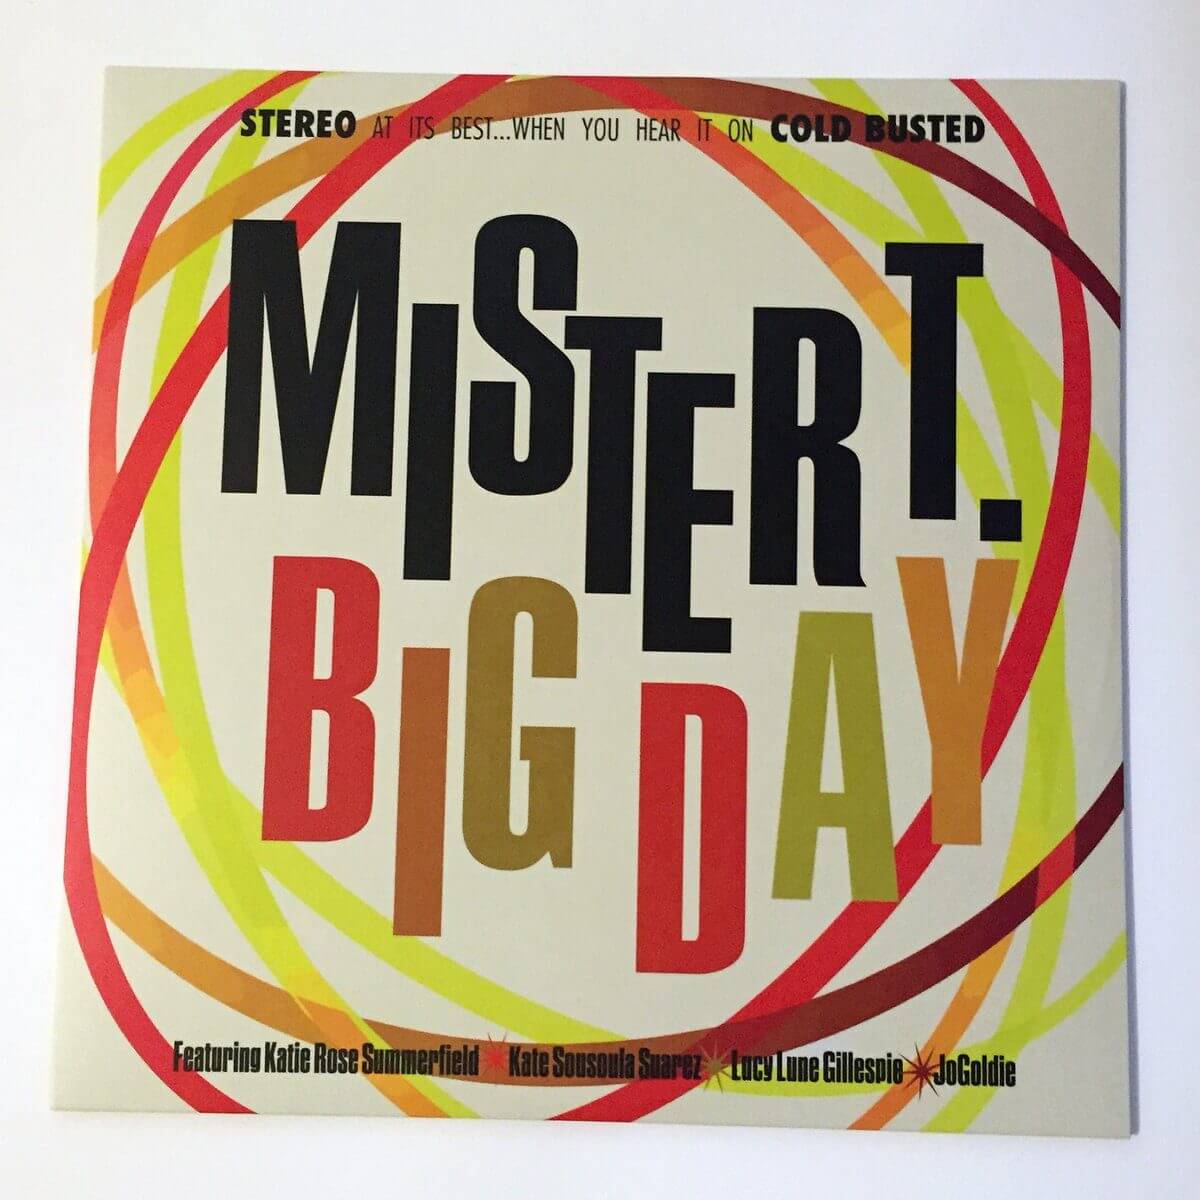 Mister T. - Big Day - Limited Edition 12 Inch Vinyl - Cold Busted